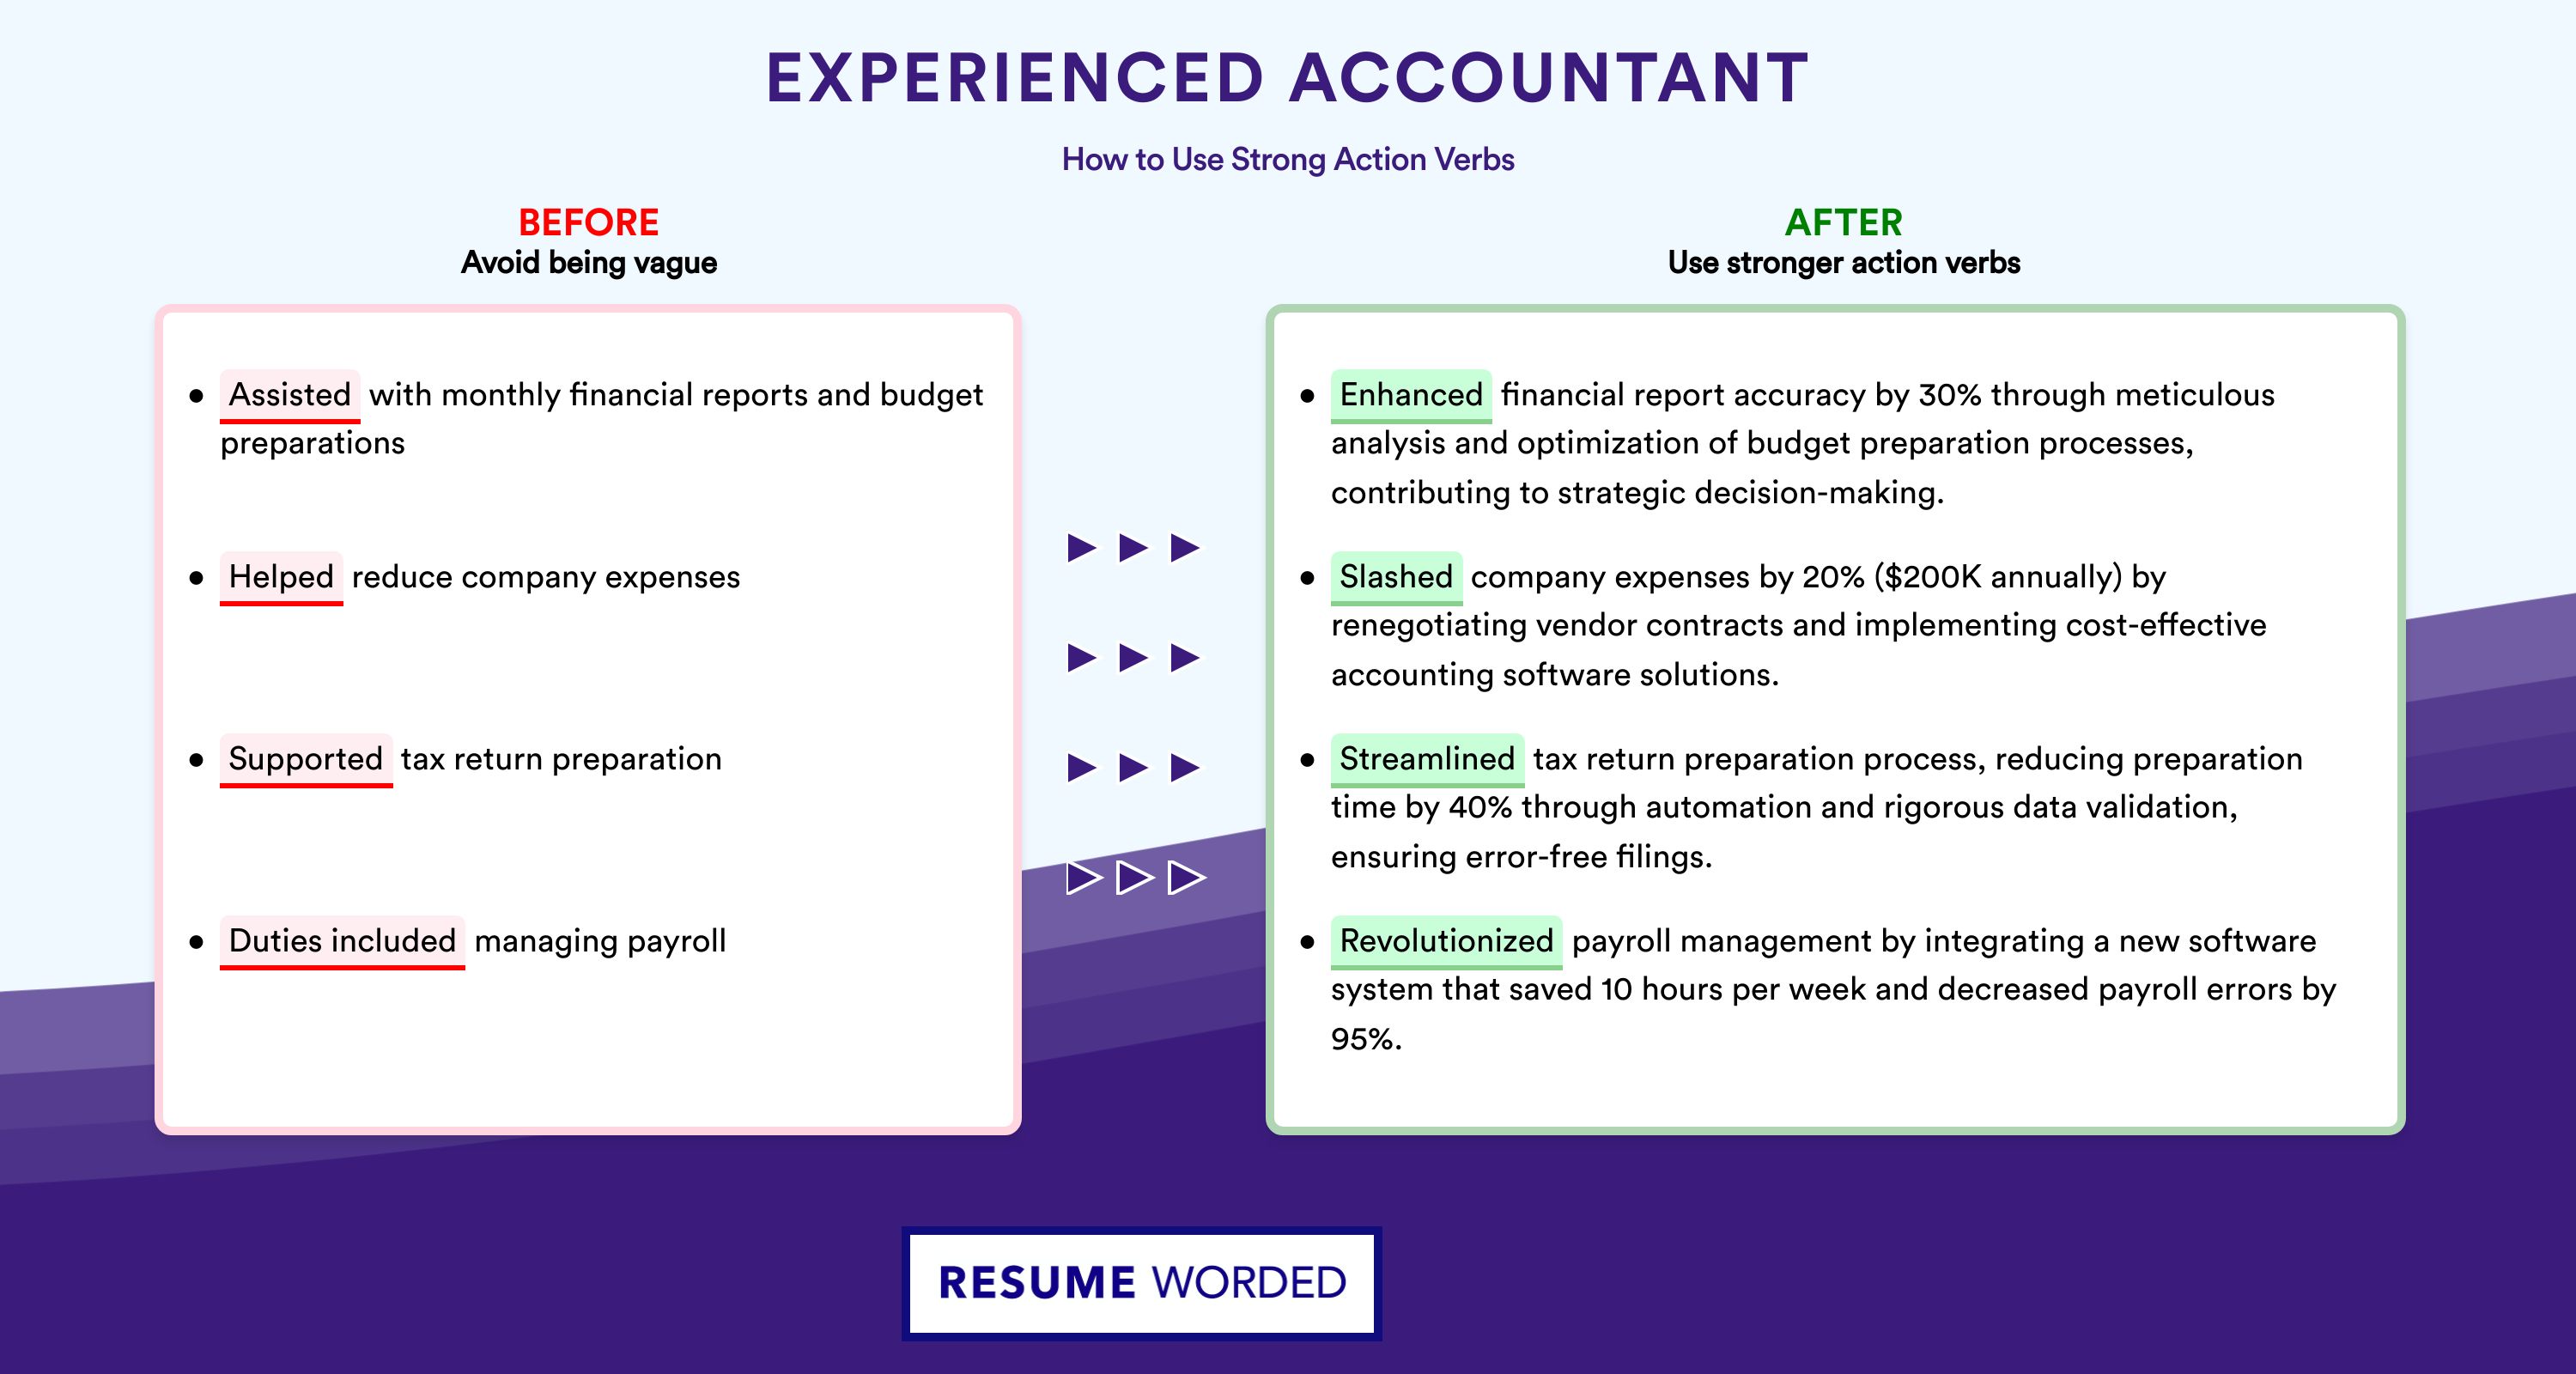 Action Verbs for Experienced Accountant